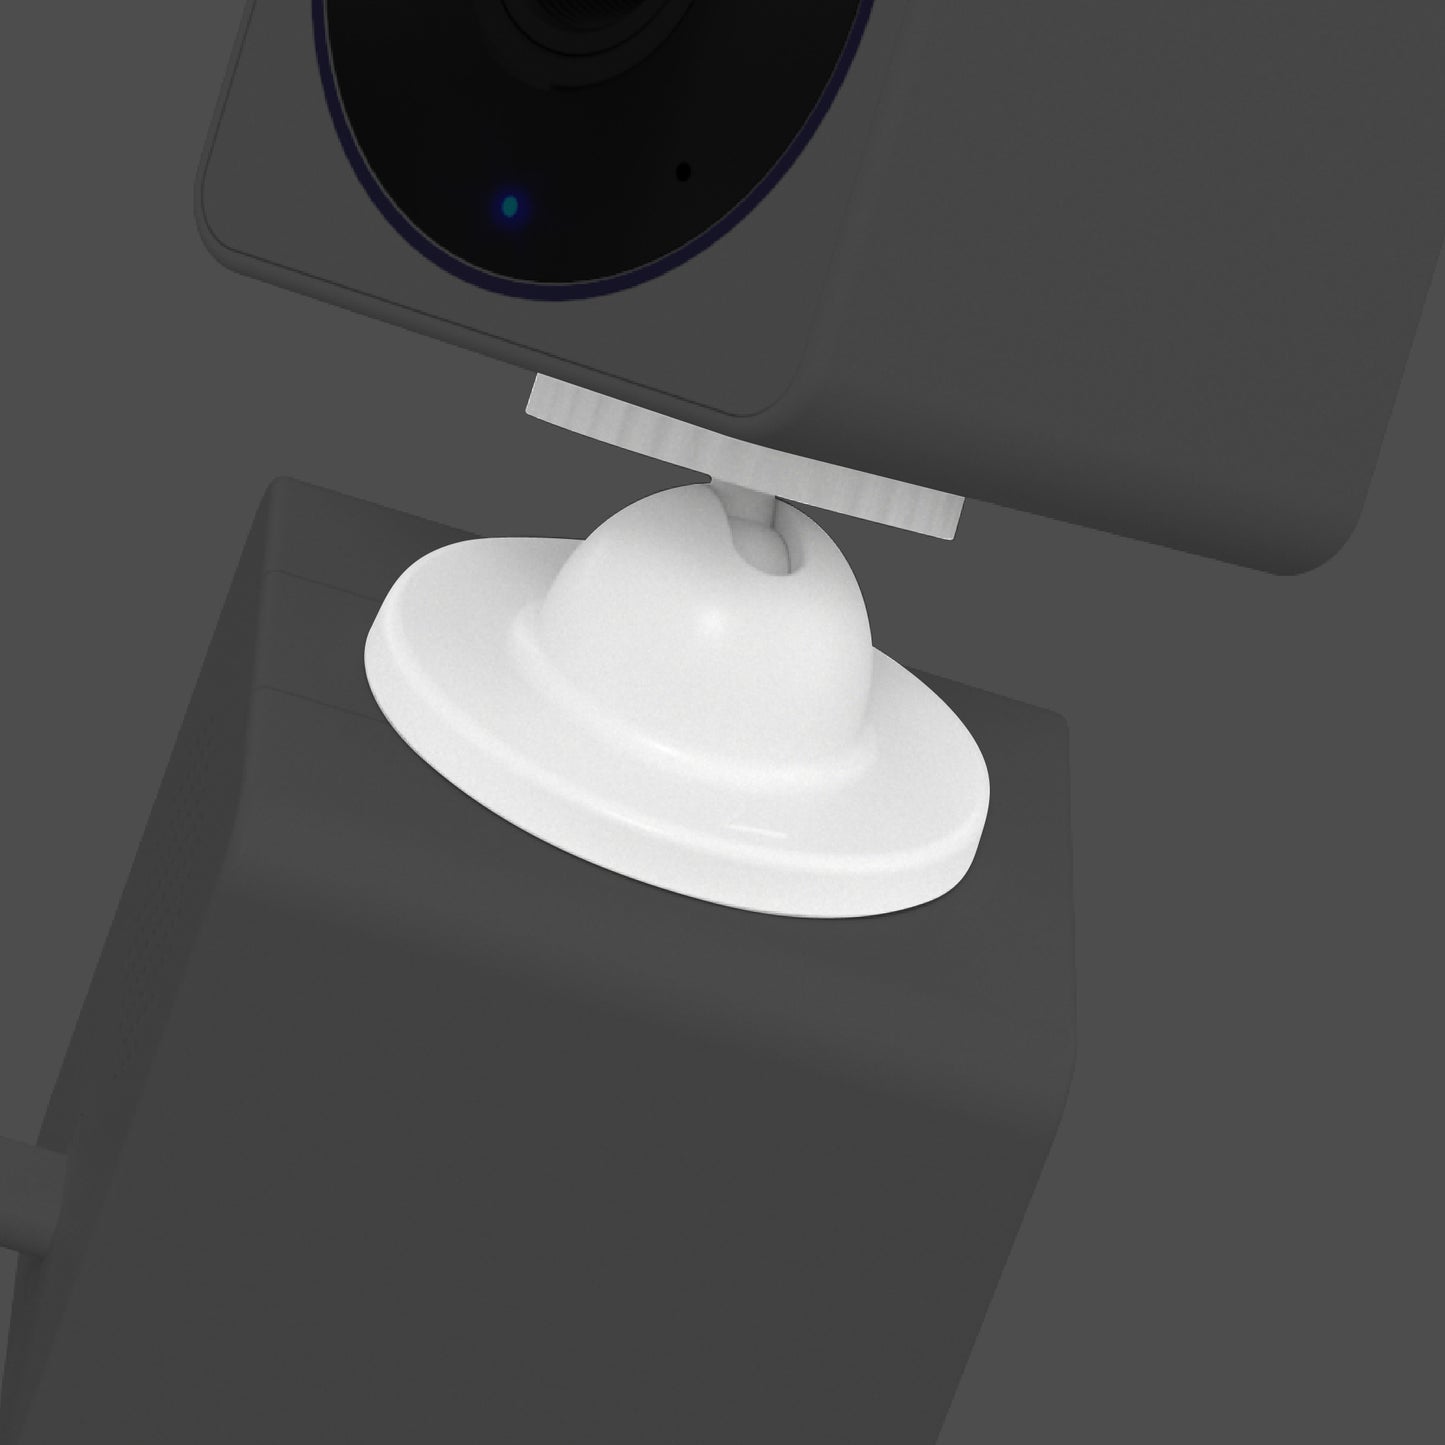 3D render of stack mount twisted to angle the attached Wyze Cam OG Telephoto camera to the side.